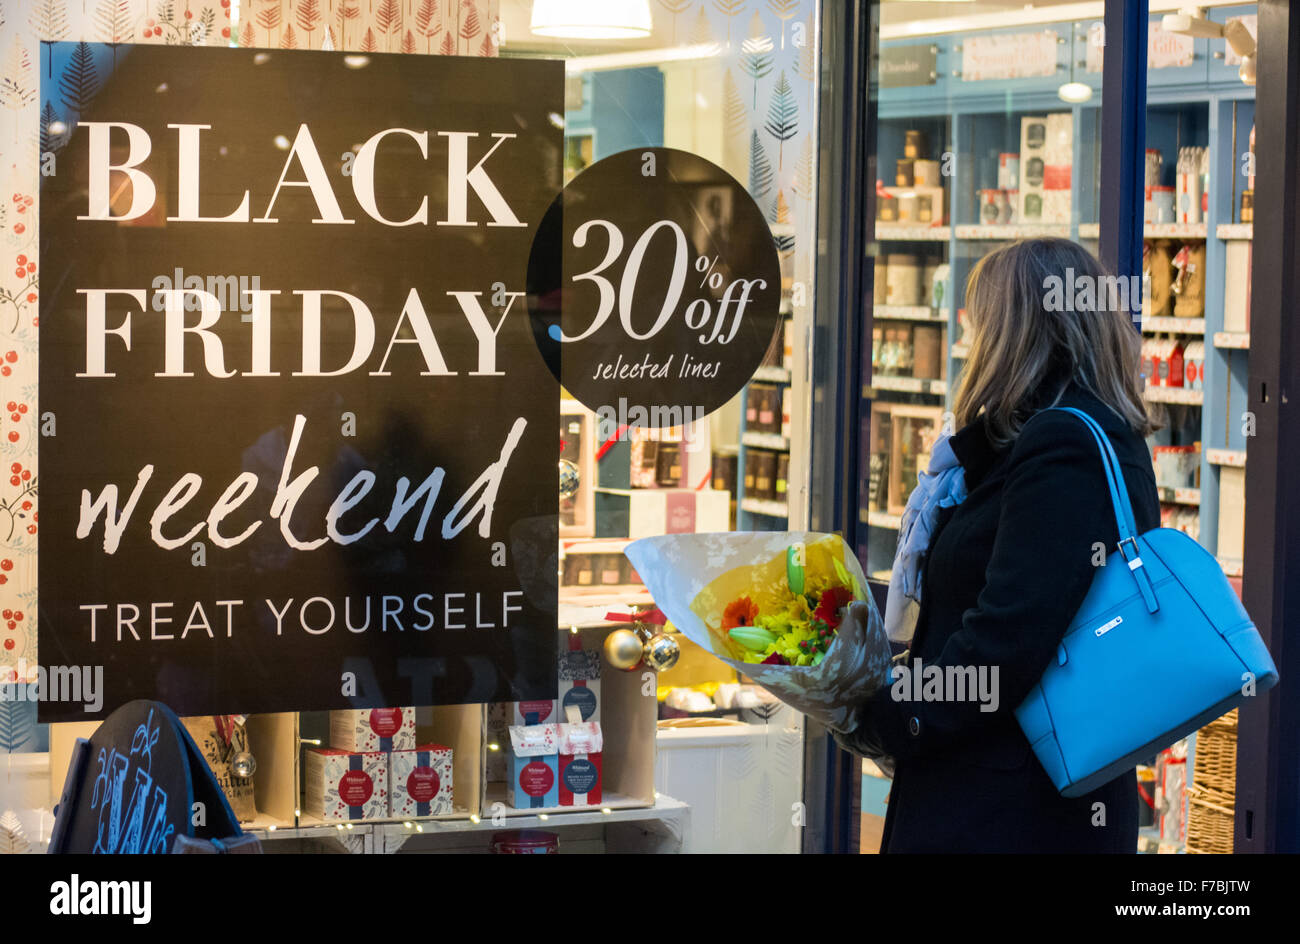 Salisbury, Wiltshire, UK. 28th November 2015. Woman shopping on Black Friday for offers as the UK takes a more relaxed approach to the US originated event. Stock Photo